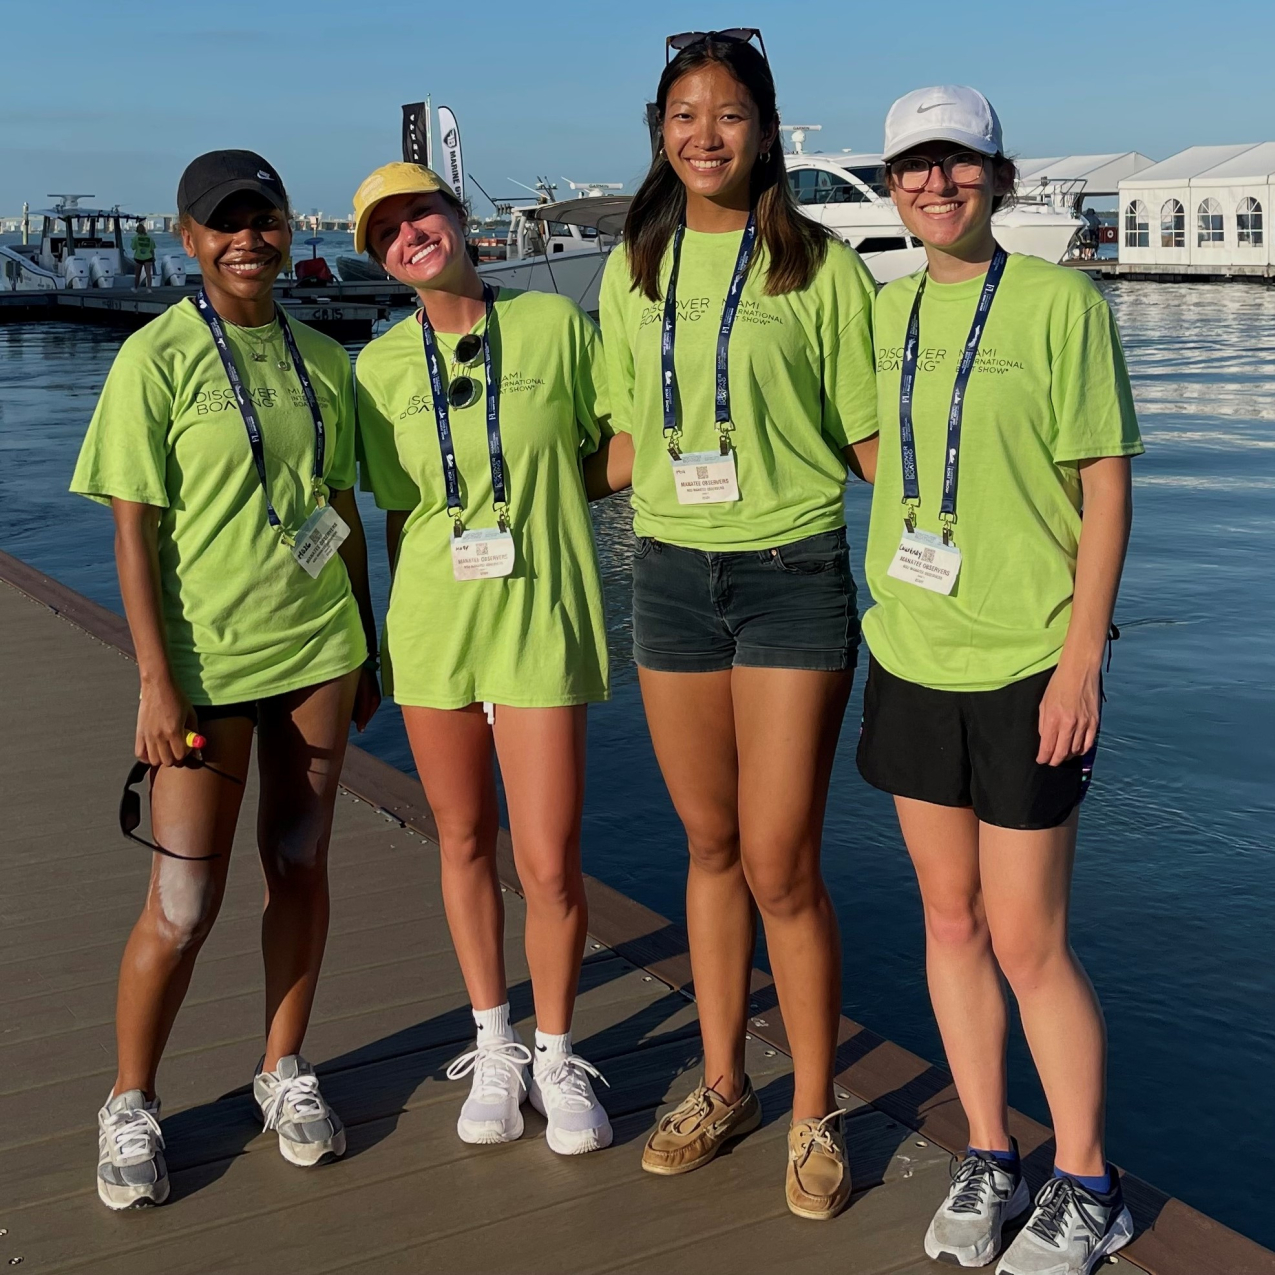 Four people pose together on a pier. They wear bright yellow shirts that say “Discover Boating, Miami International Boat Show” and have lanyards identifying them as manatee observers.